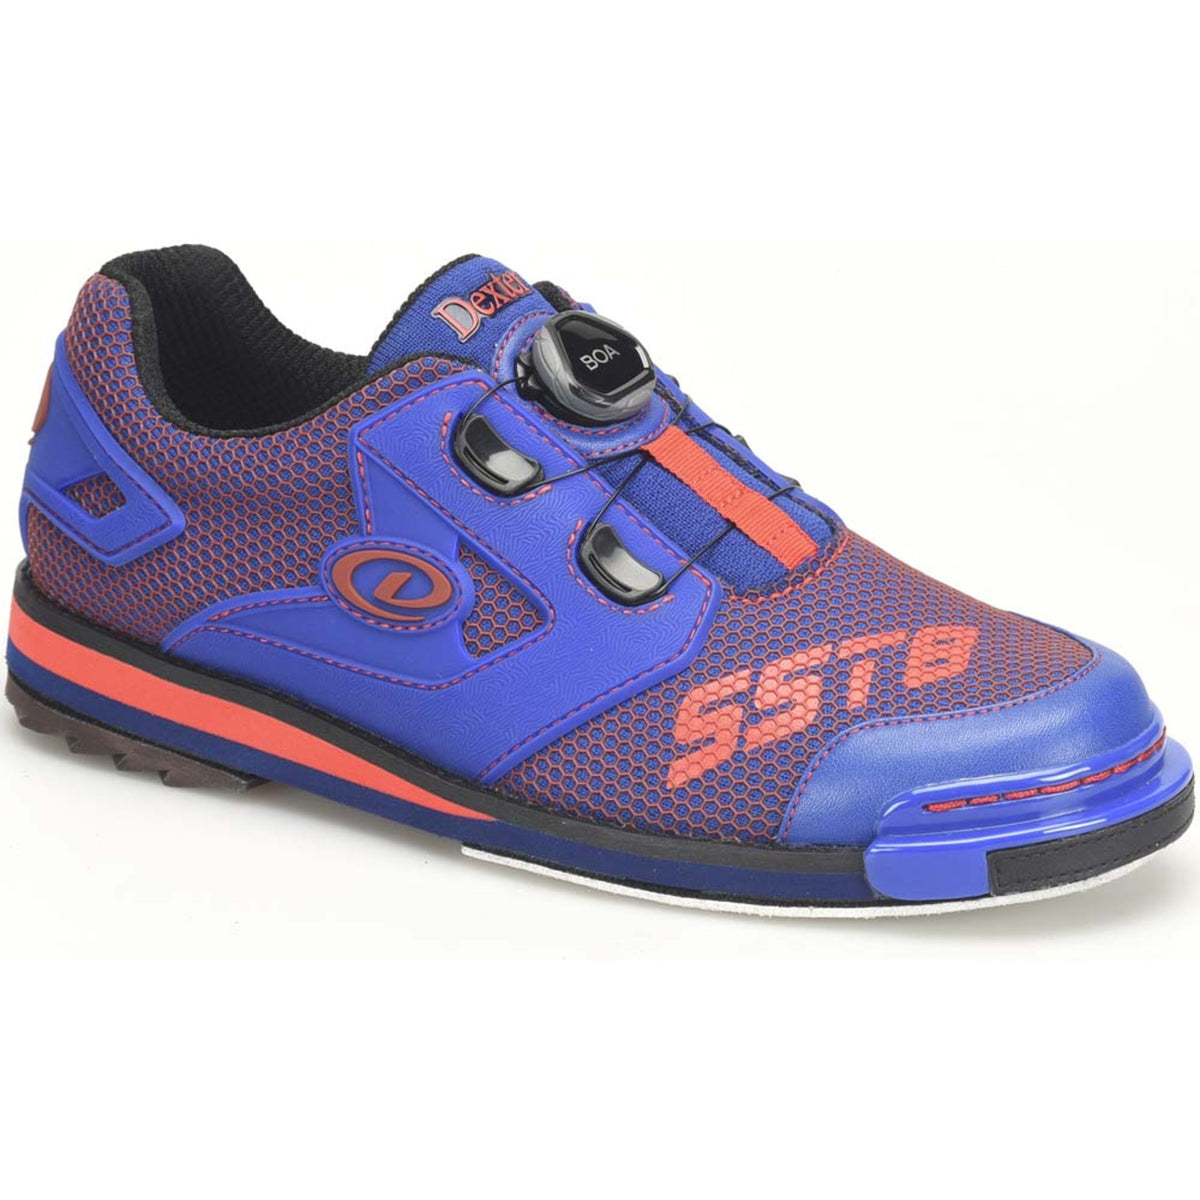 Sst 8 Power Frame Boa Blue/ Red Shoes